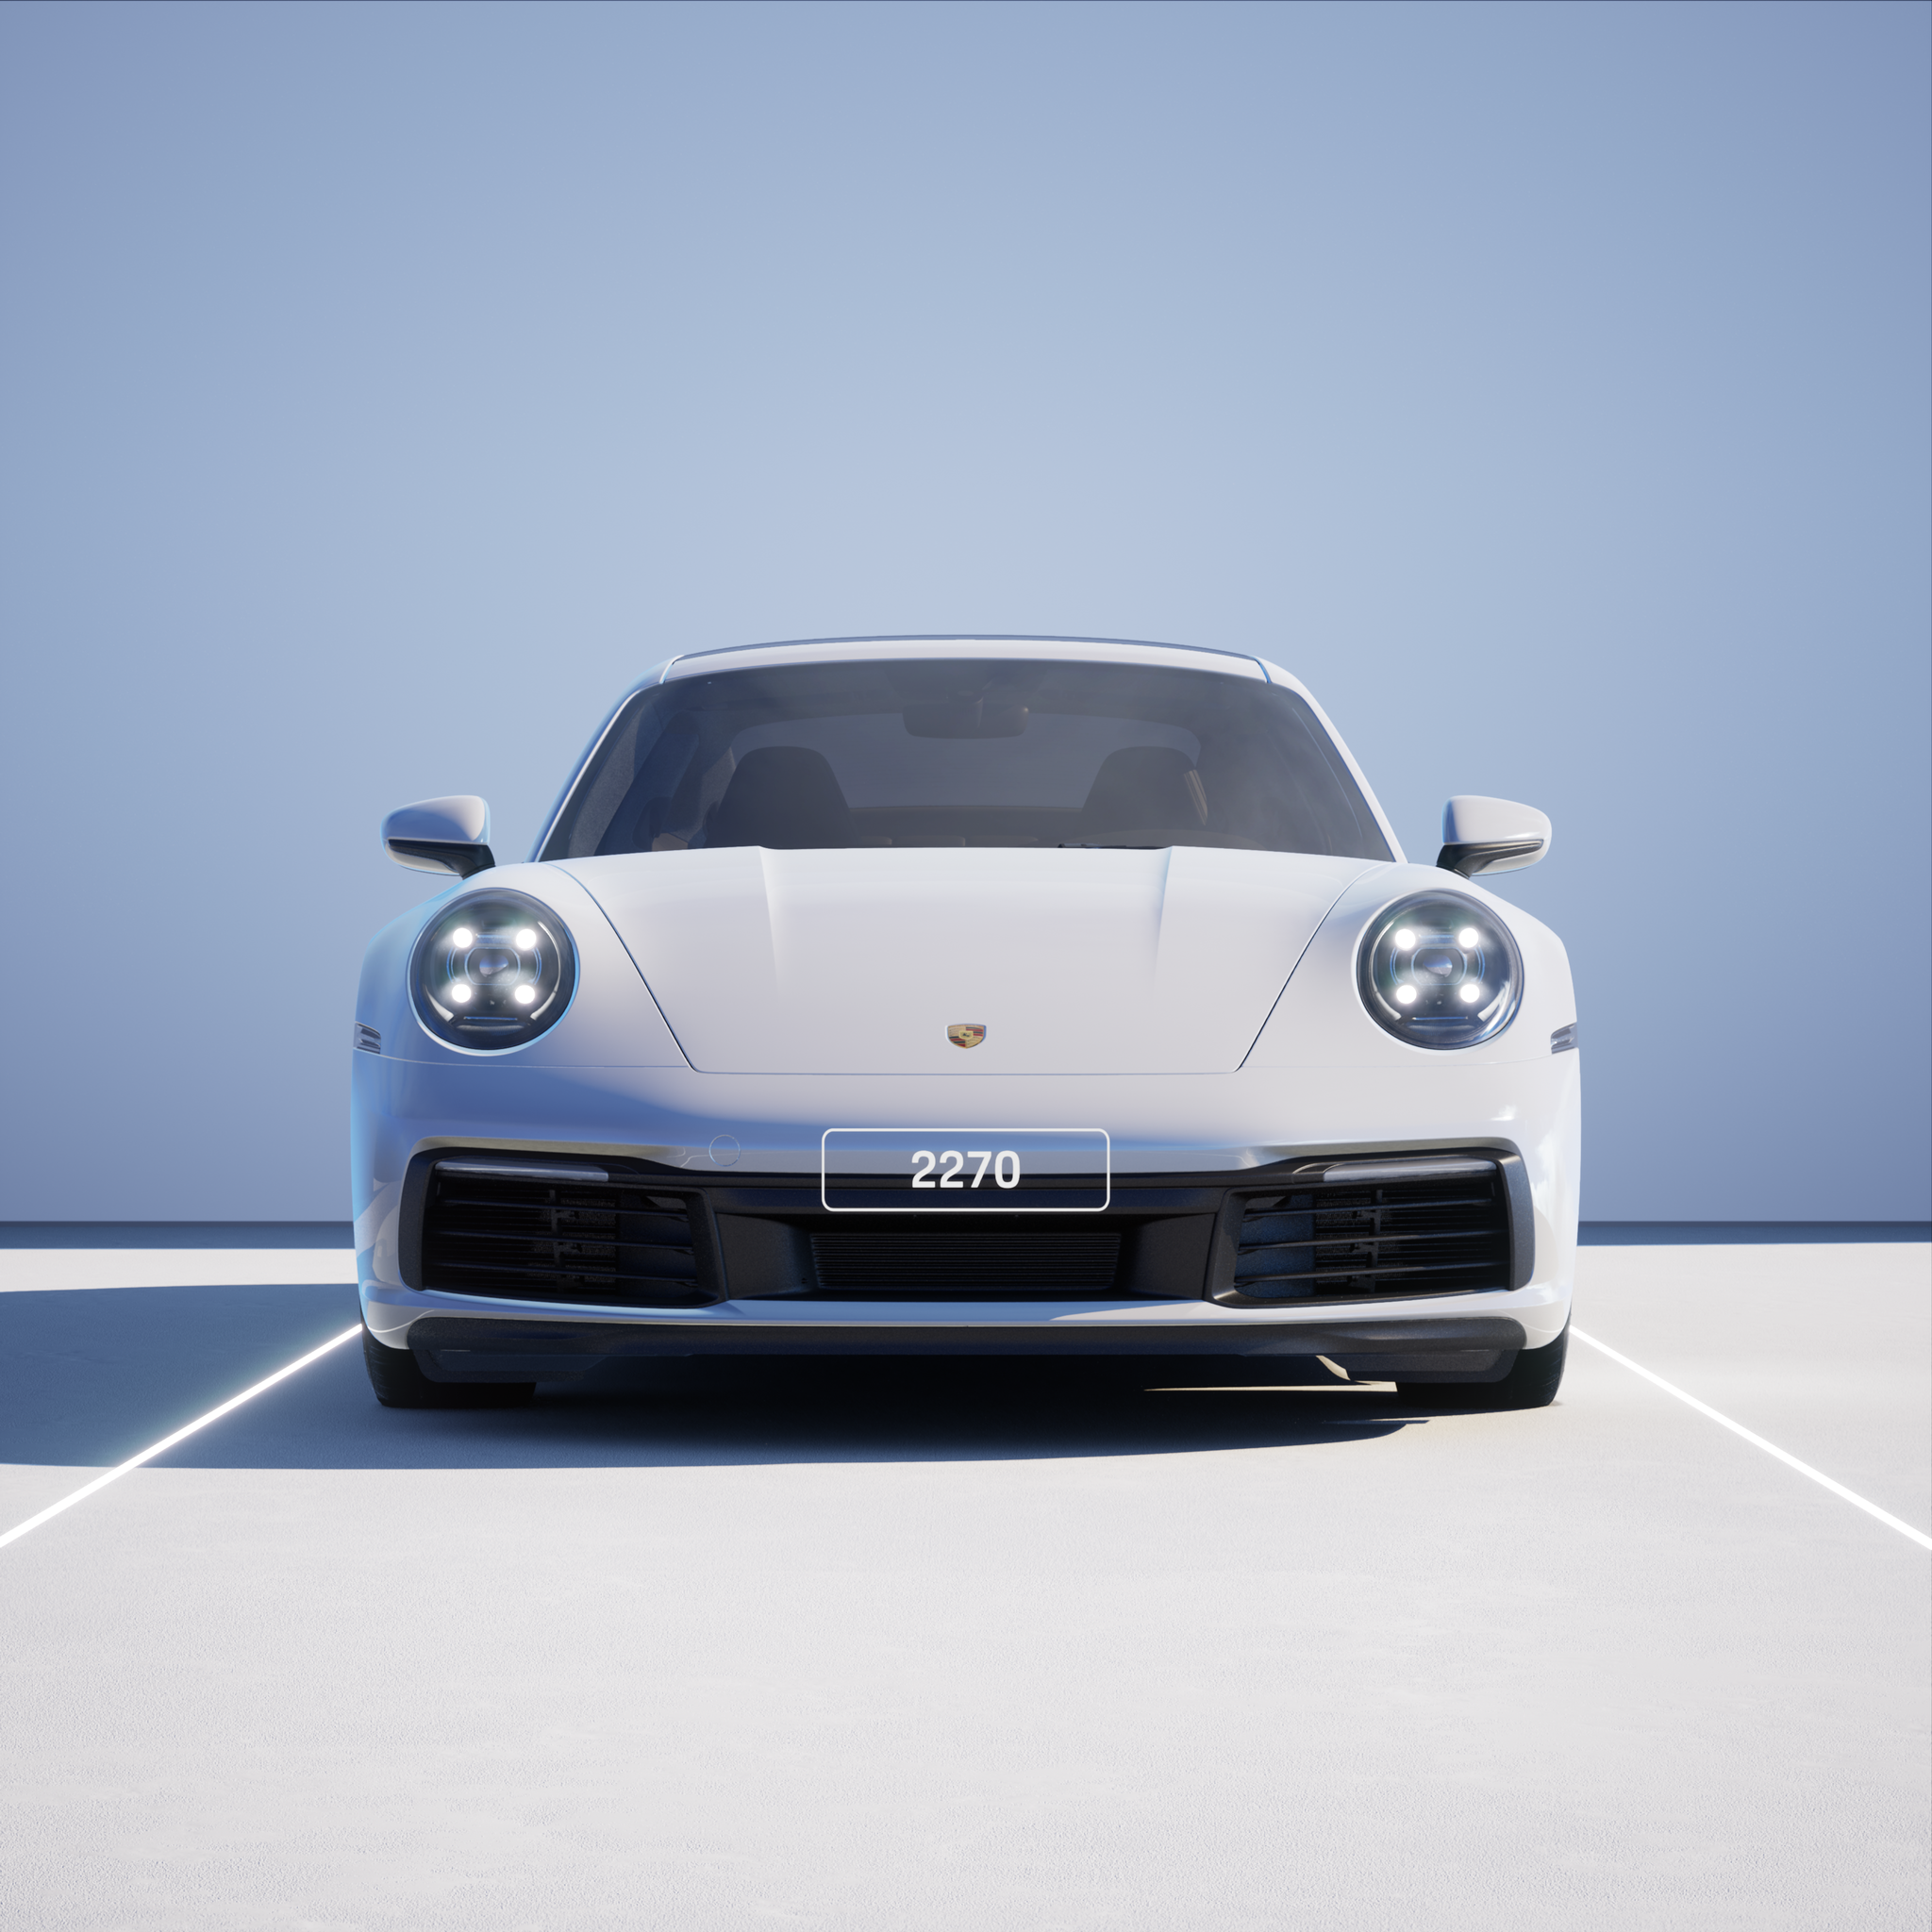 The PORSCHΞ 911 2270 image in phase